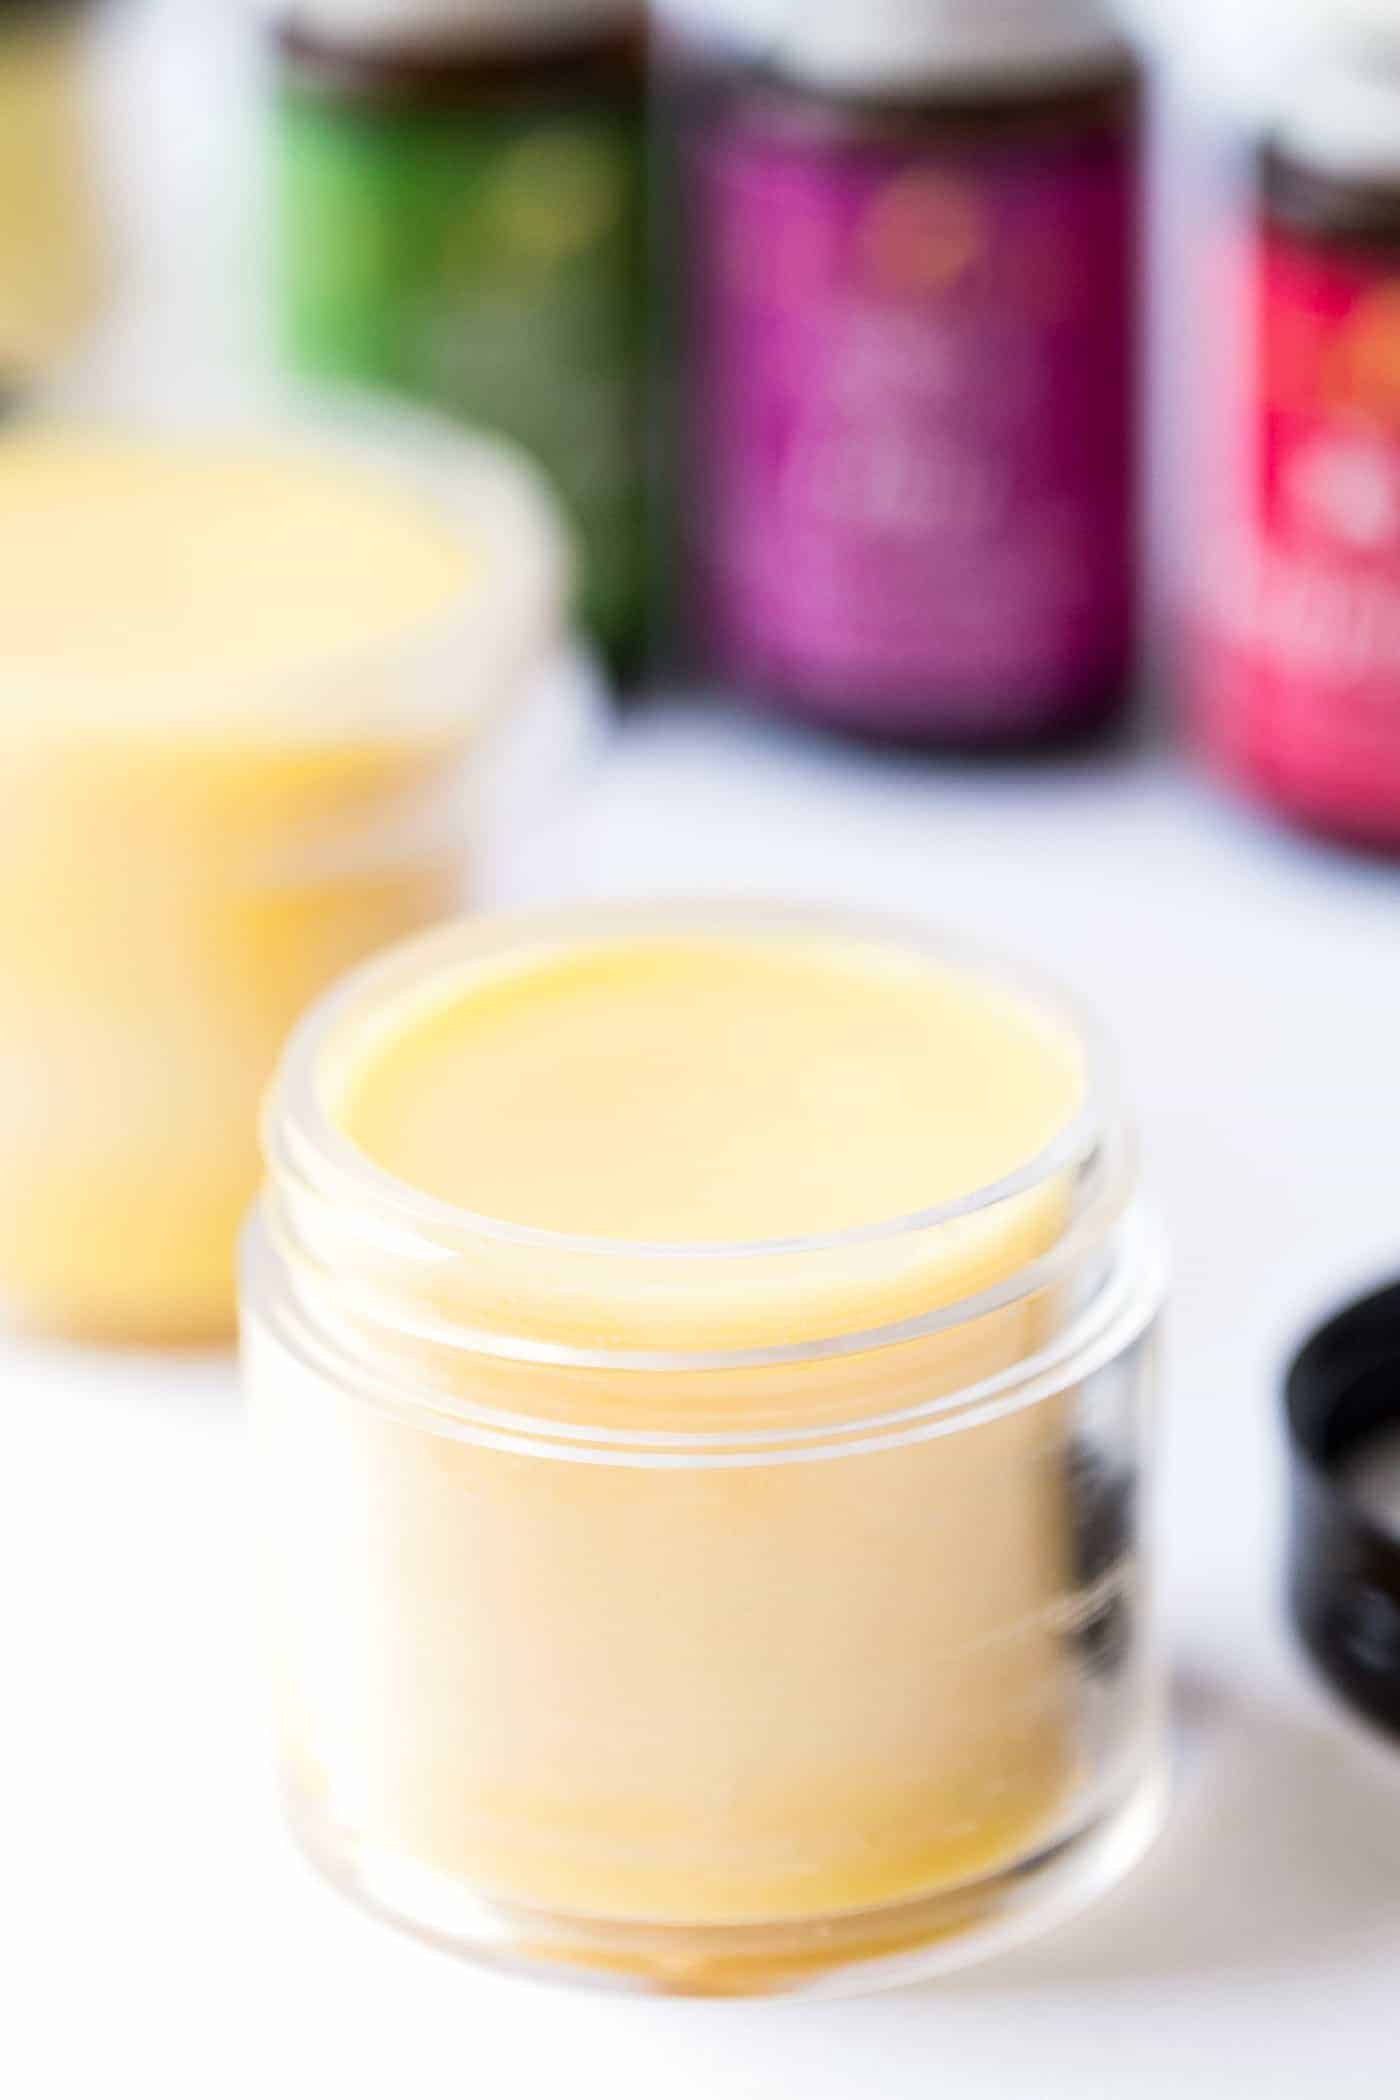 This DIY solid perfume is a wonderful addition to your natural beauty regime. It's made from only 100% pure ingredients and is totally customizable to your liking!